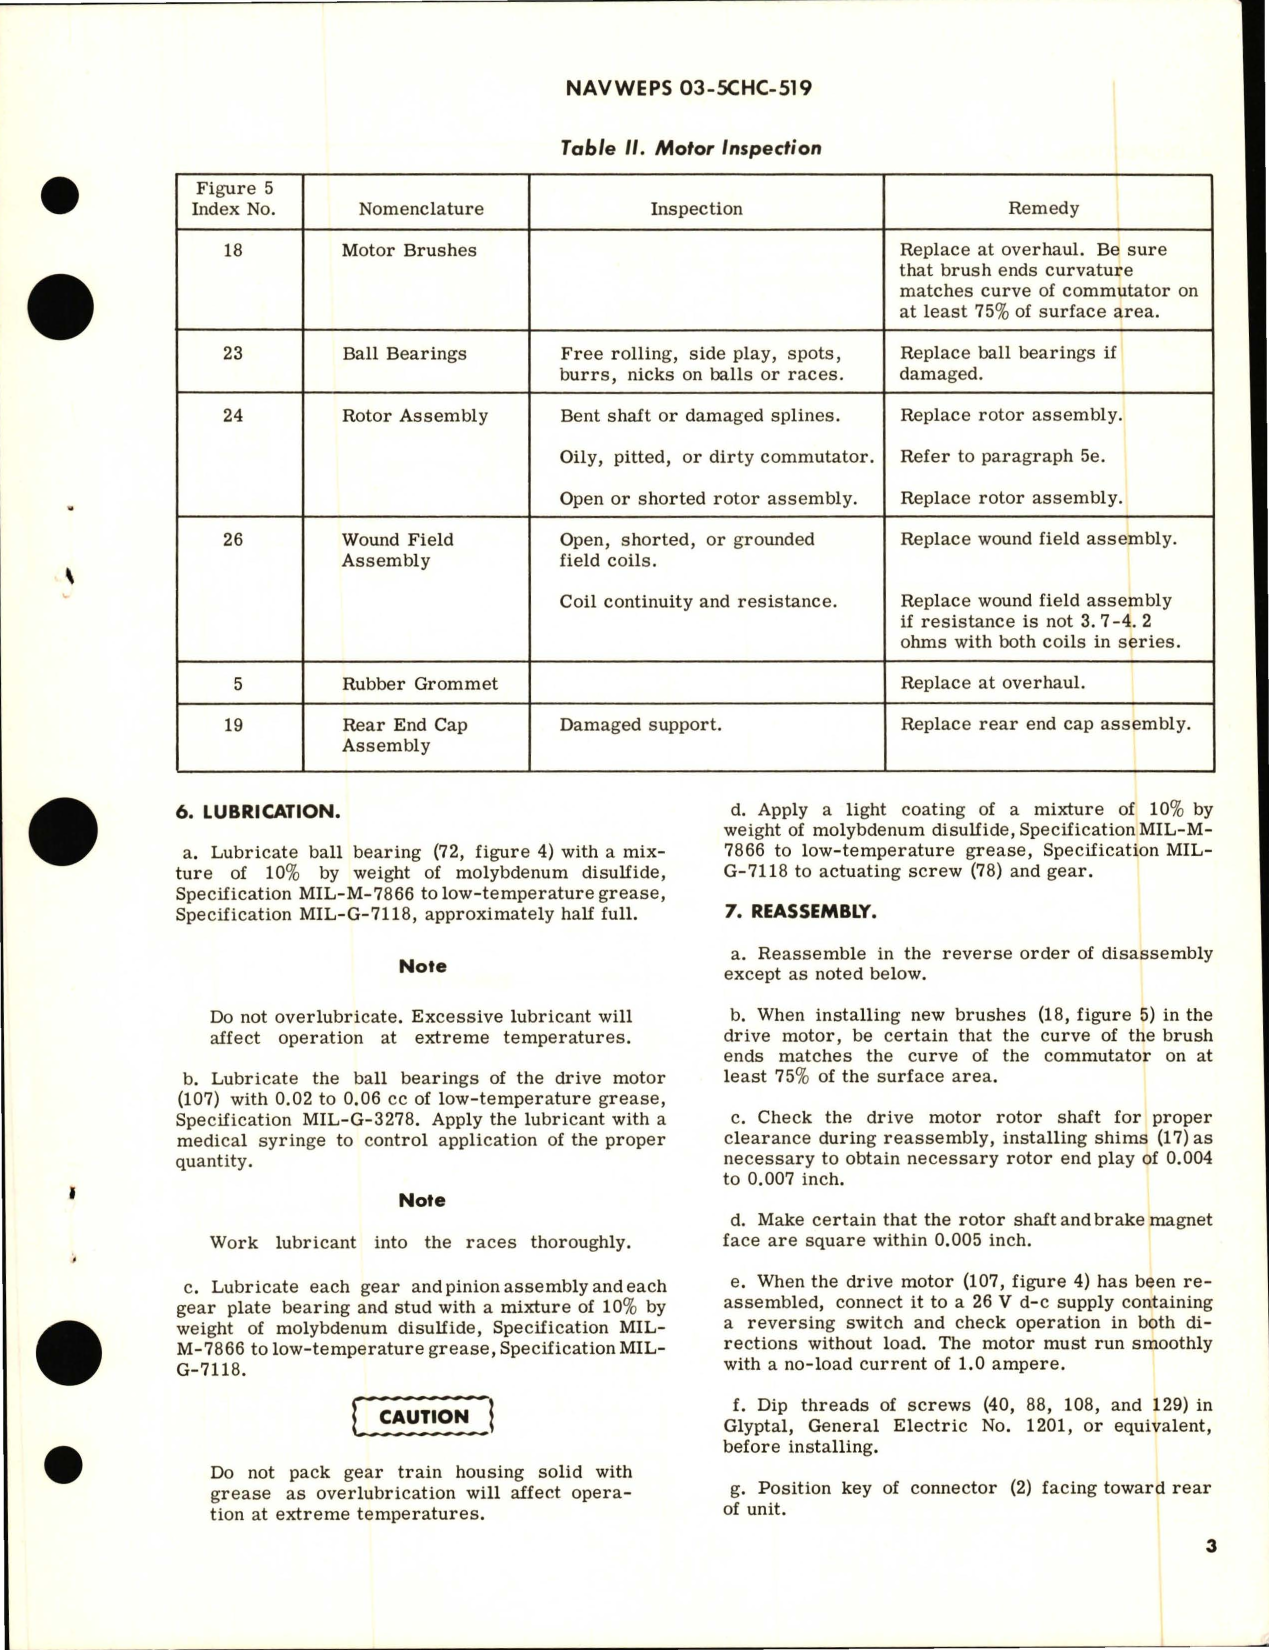 Sample page 5 from AirCorps Library document: Overhaul Instructions with Parts Breakdown for Electromechanical Linear Load Limit Actuator - KYLC 4248-2, KYLC 4248-3 and KYLC 4248-4